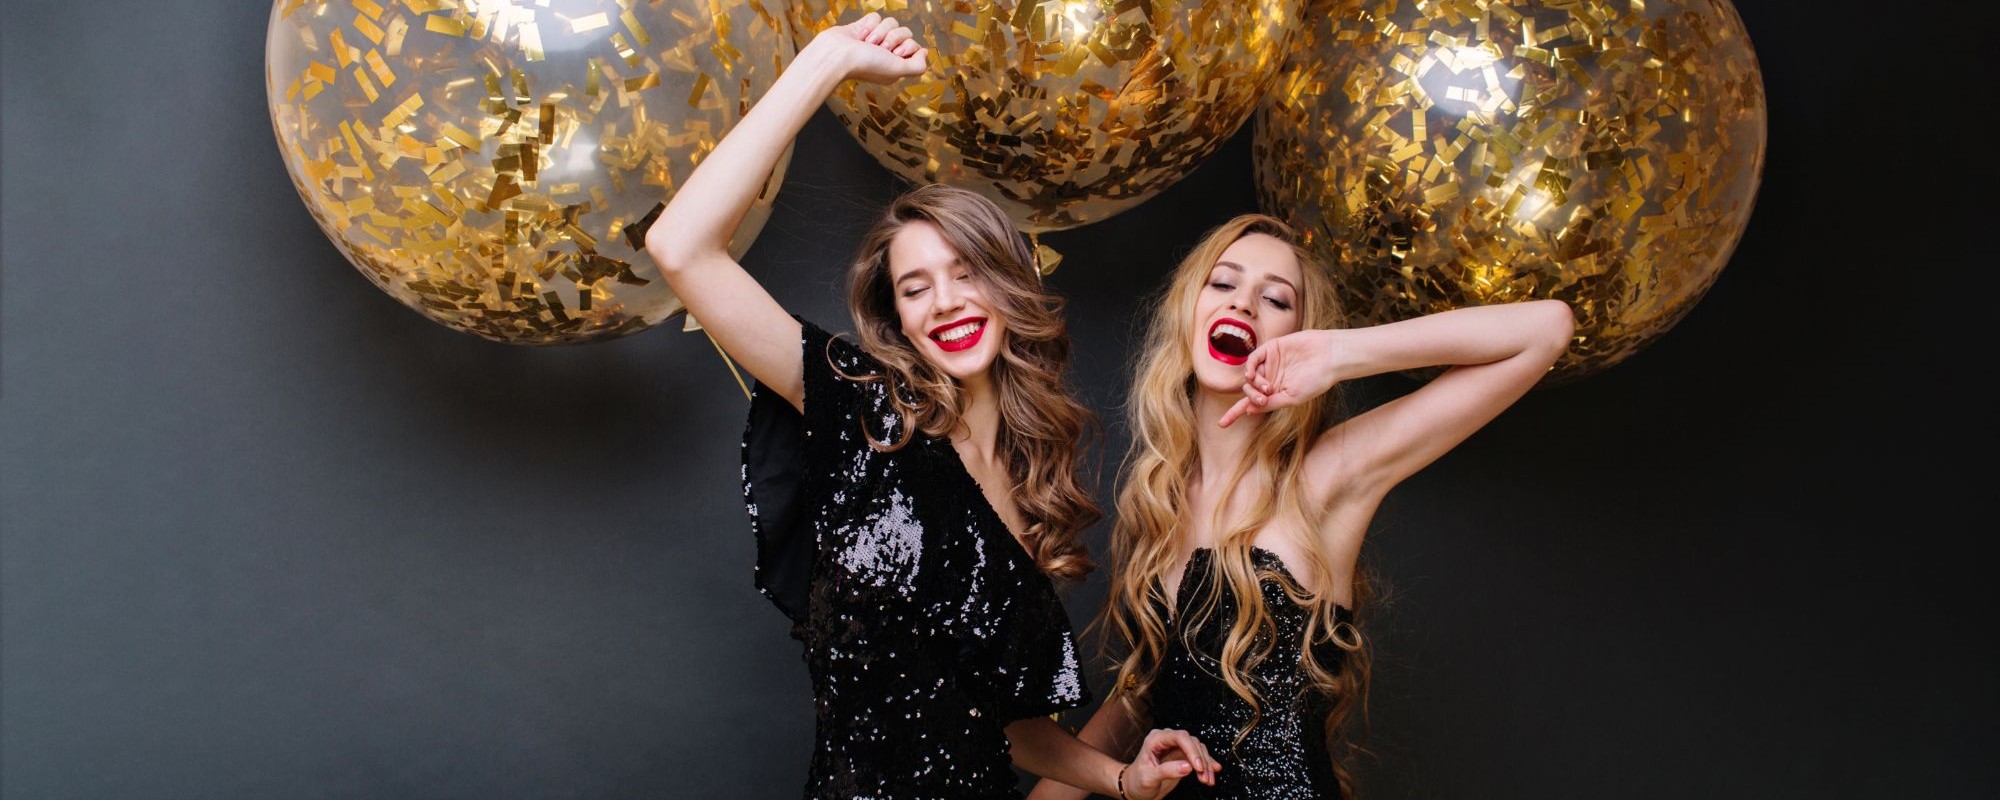 happy-party-moments-two-fashionable-funny-young-women-luxury-black-dress-red-lips-long-curly-hair-brightful-mood-having-fun-big-balloons-with-golden-tinsels